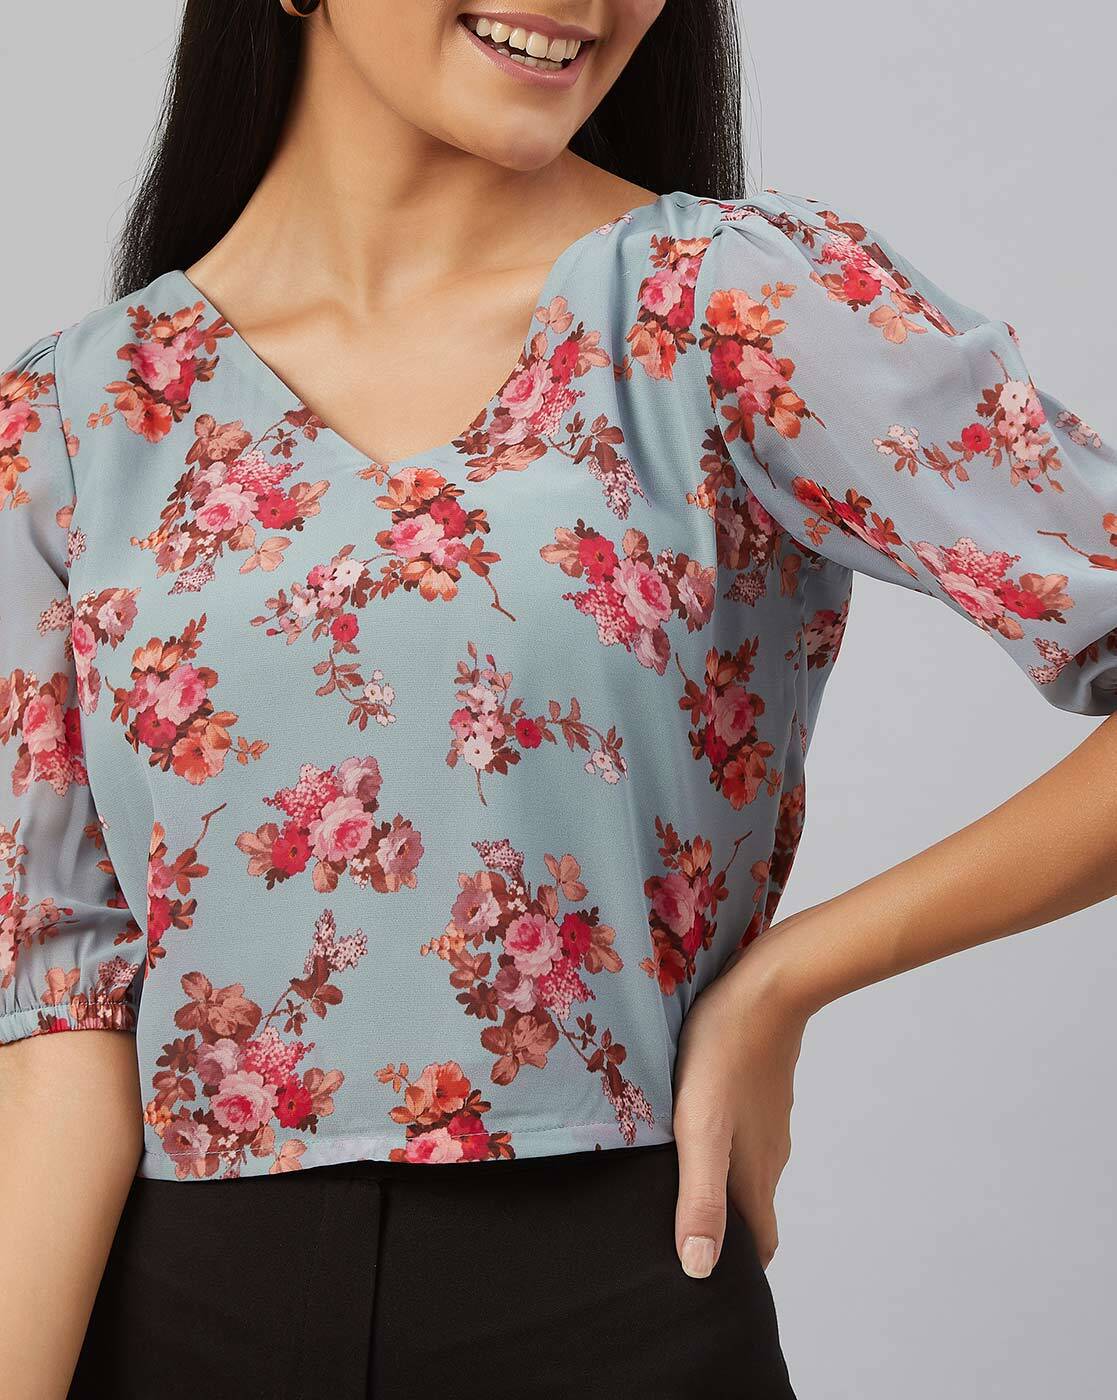 Willow & Root Floral Chiffon Top - Women's Shirts/Blouses in Blue Grey